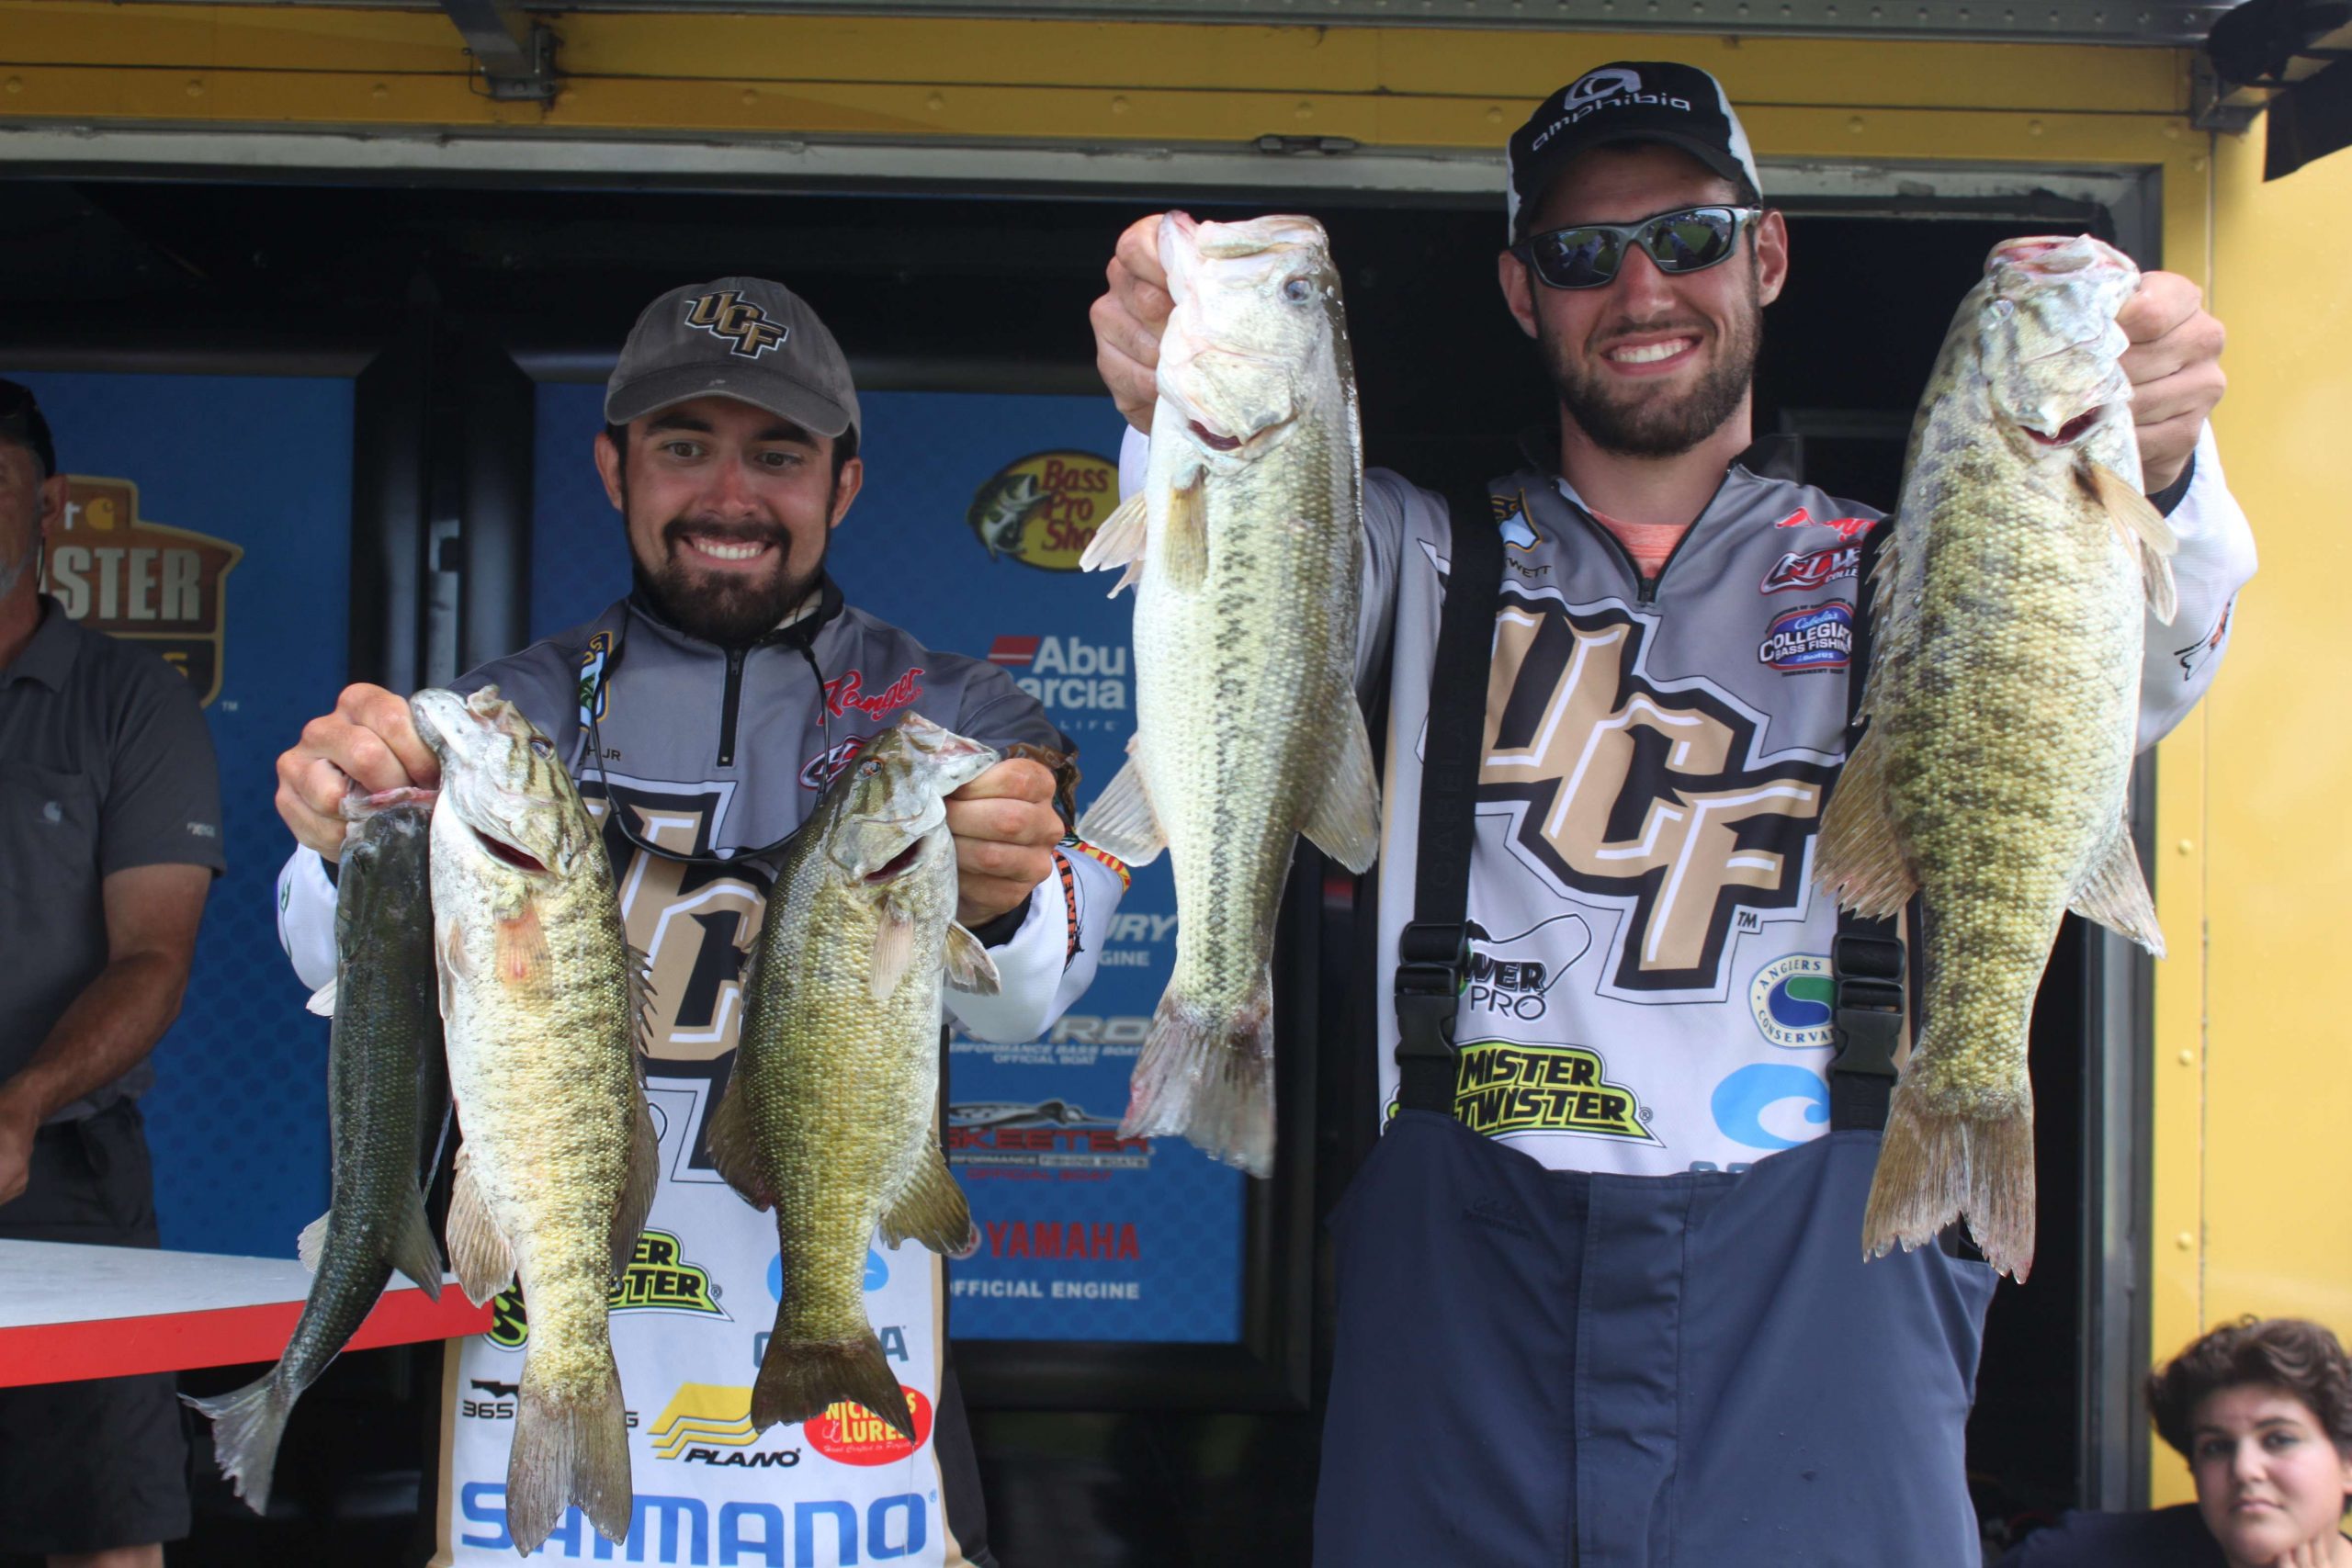 Rick Couch Jr. and Cole Hewett of the University of Central Florida are tied for 44th with 12-4.